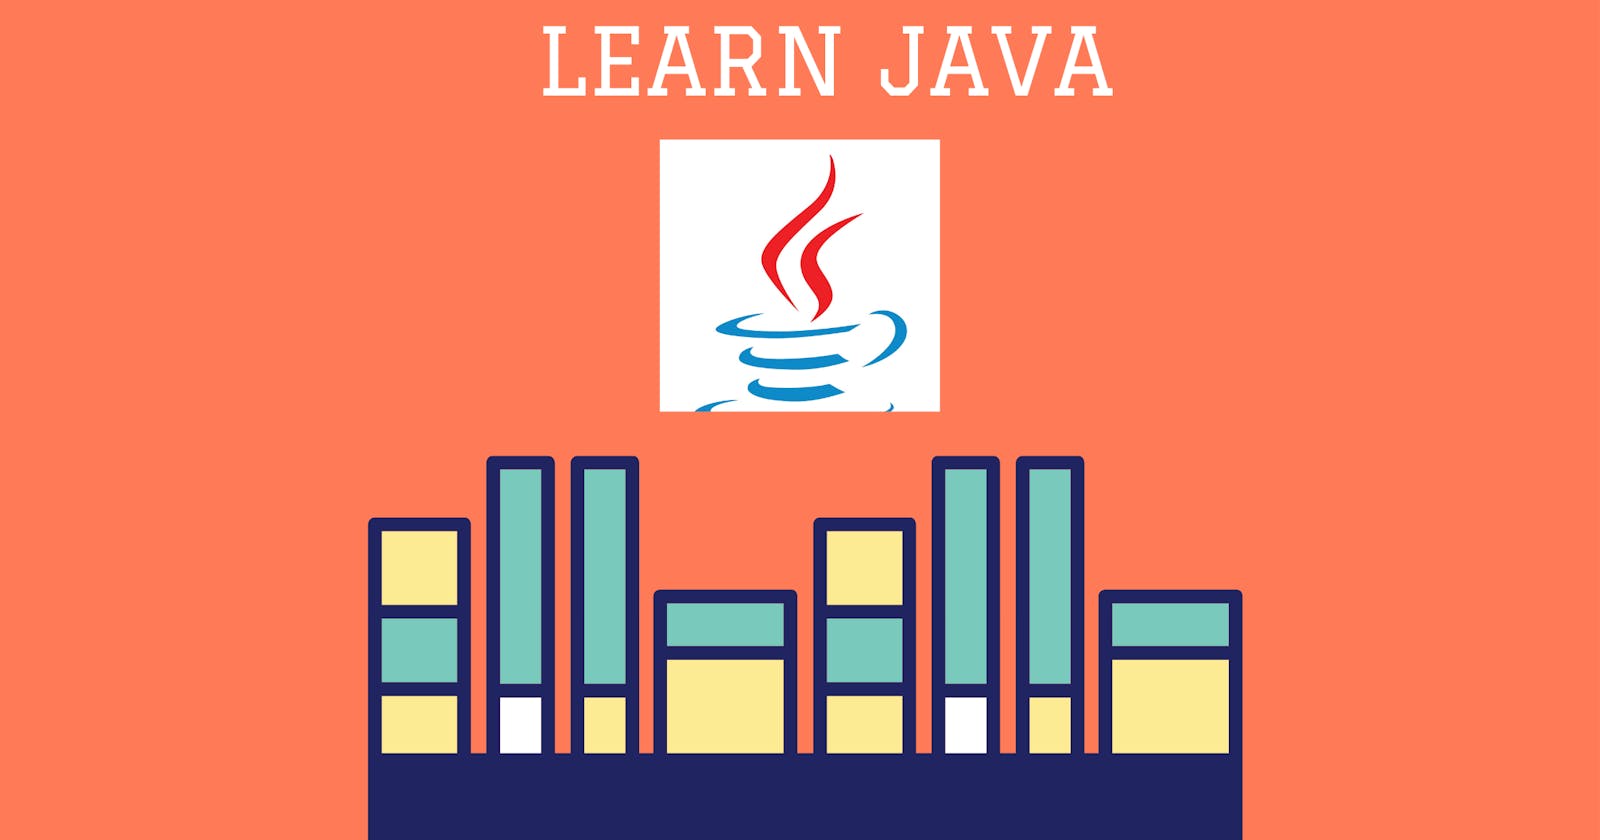 Top 10 Books to learn Java